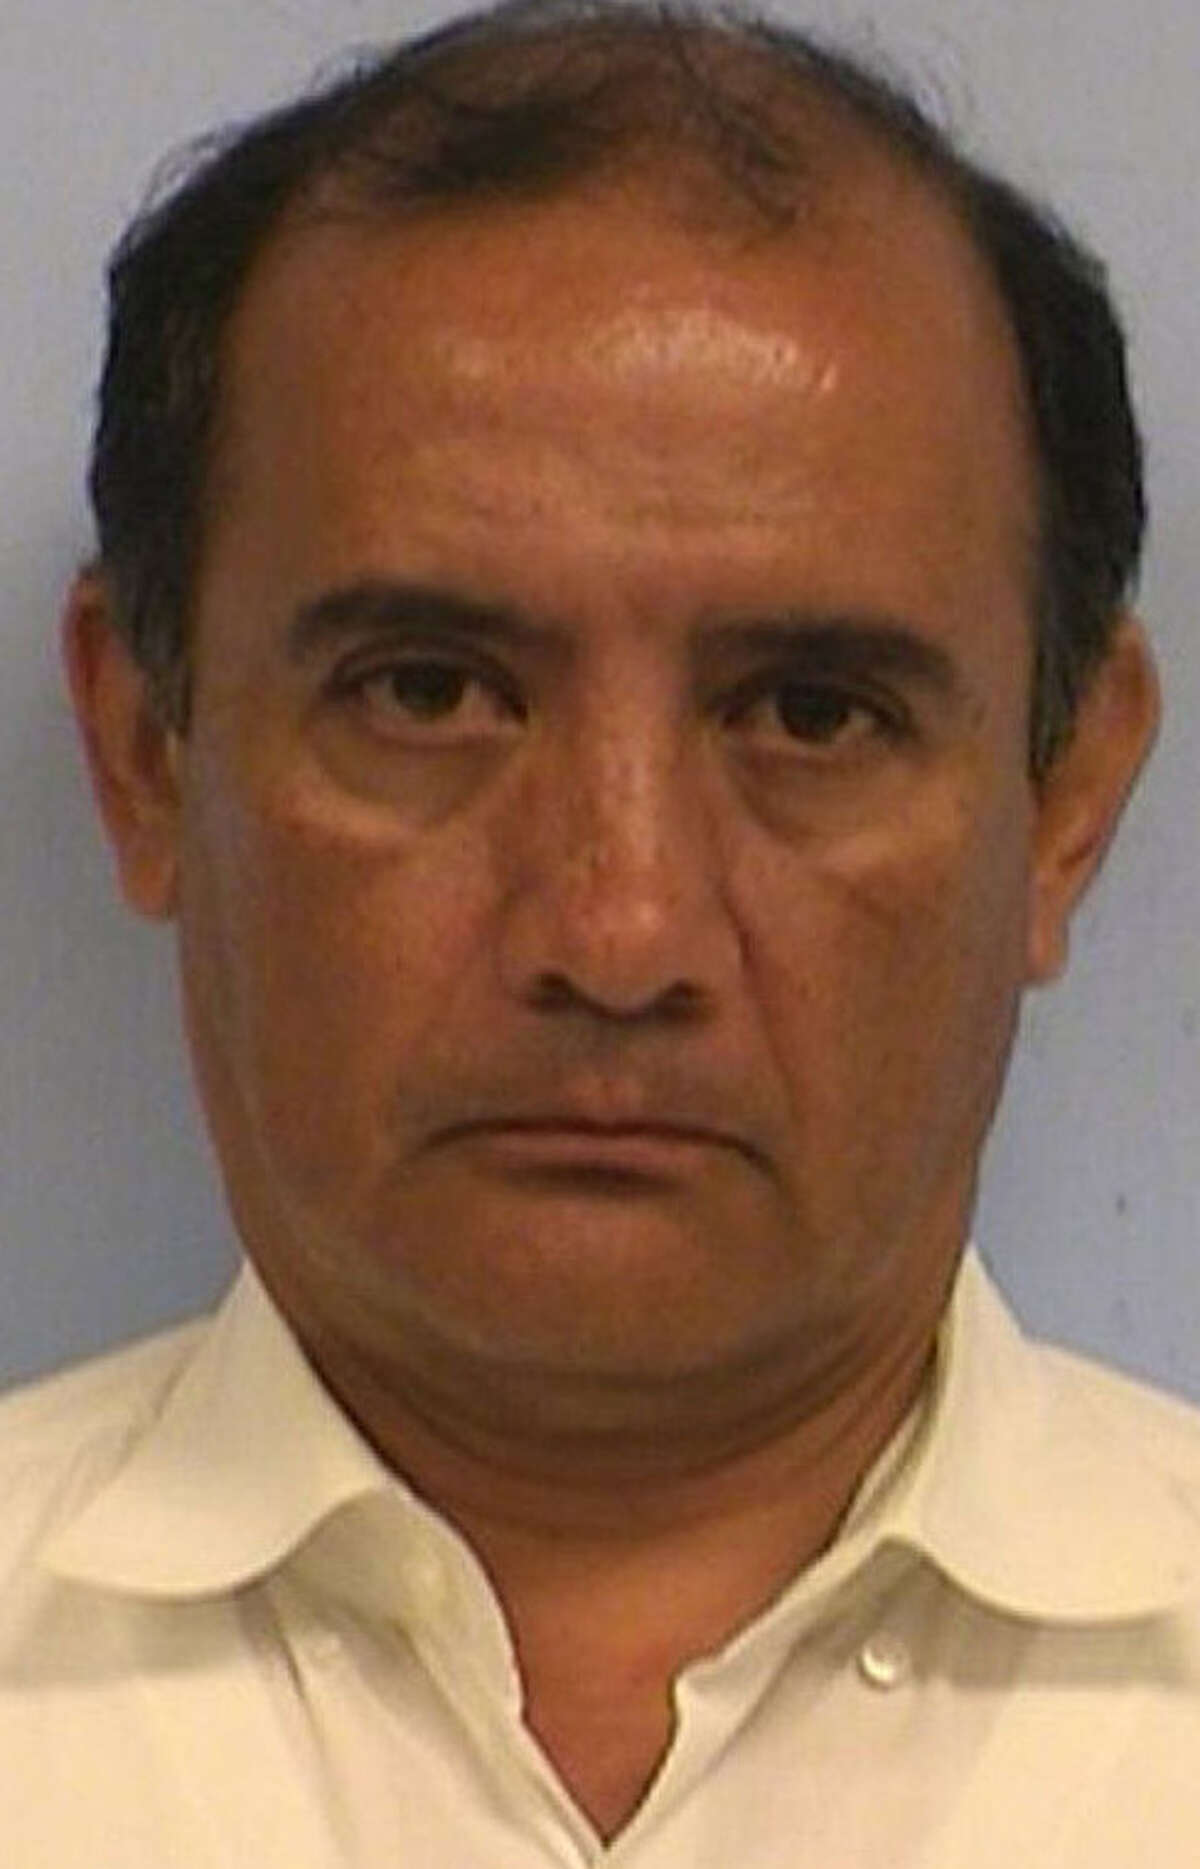 Ramon Segura Flores:He and the others now face five-year sentences for pleading guilty in the bribery case.